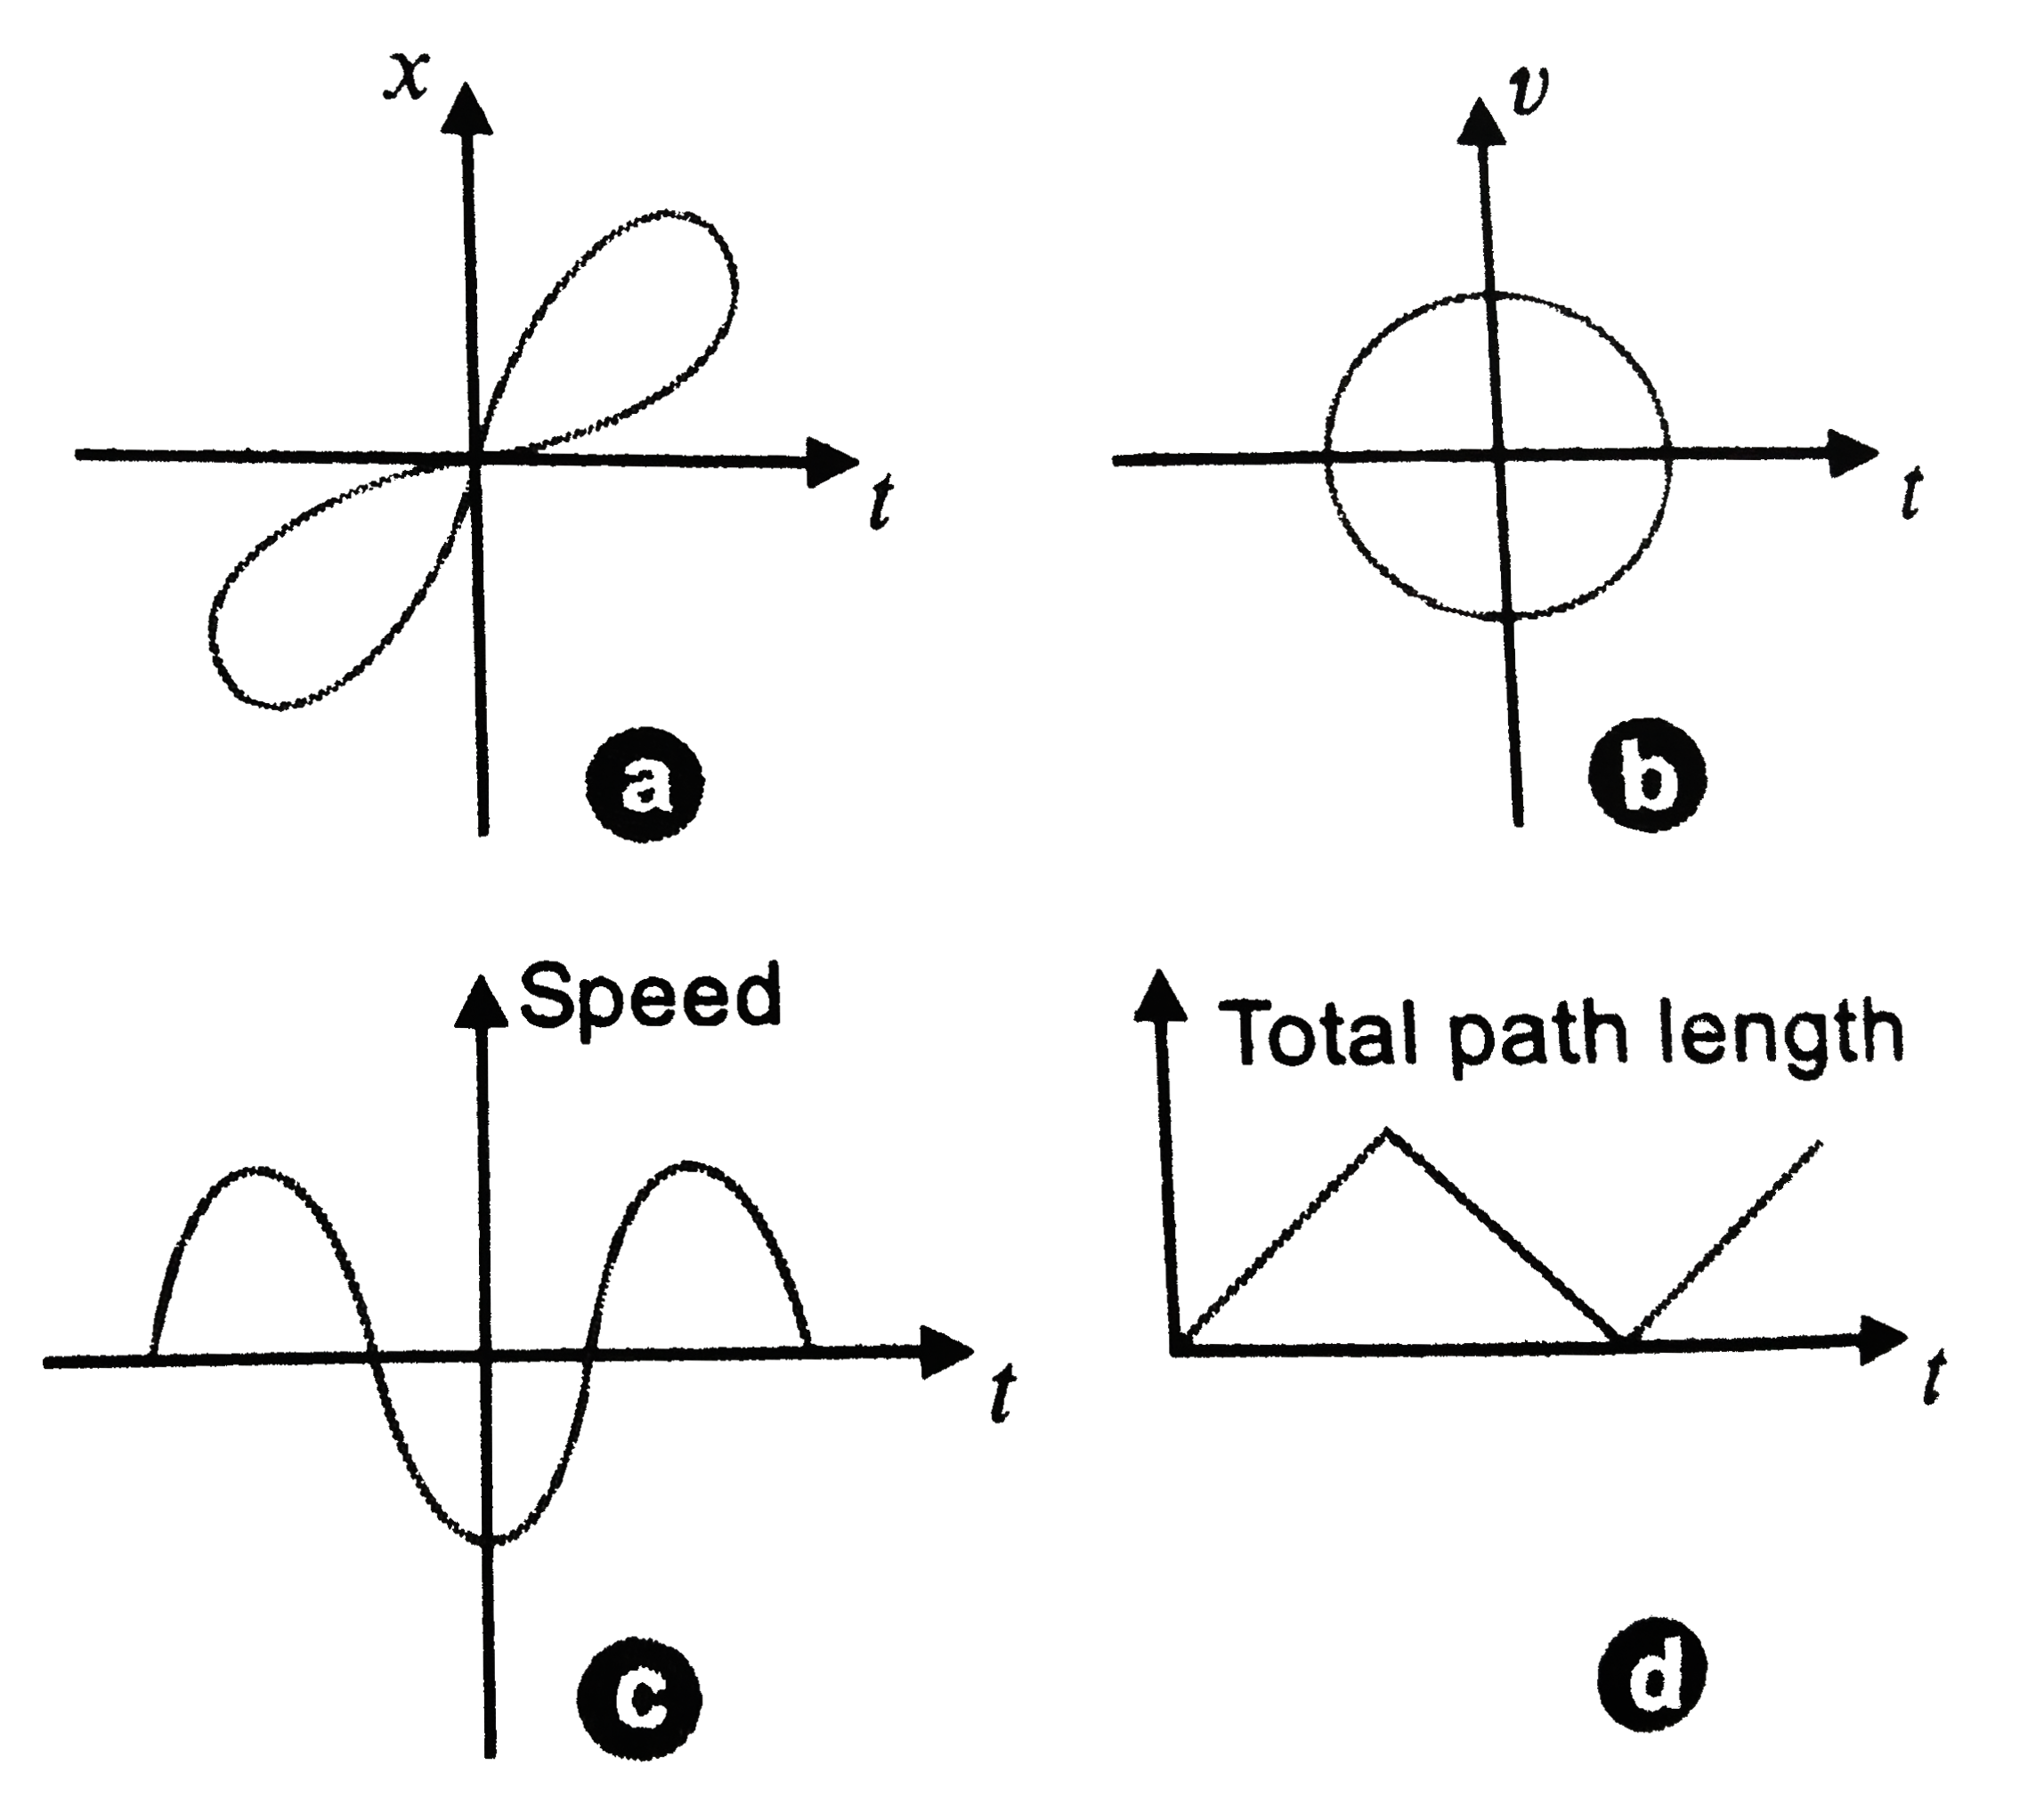 Look at the graphs Fig. 2 (NCT) .5.(a) to (d) carefully and state, with reasons, with of these connot possinly represent on edimensional motion of a particle.